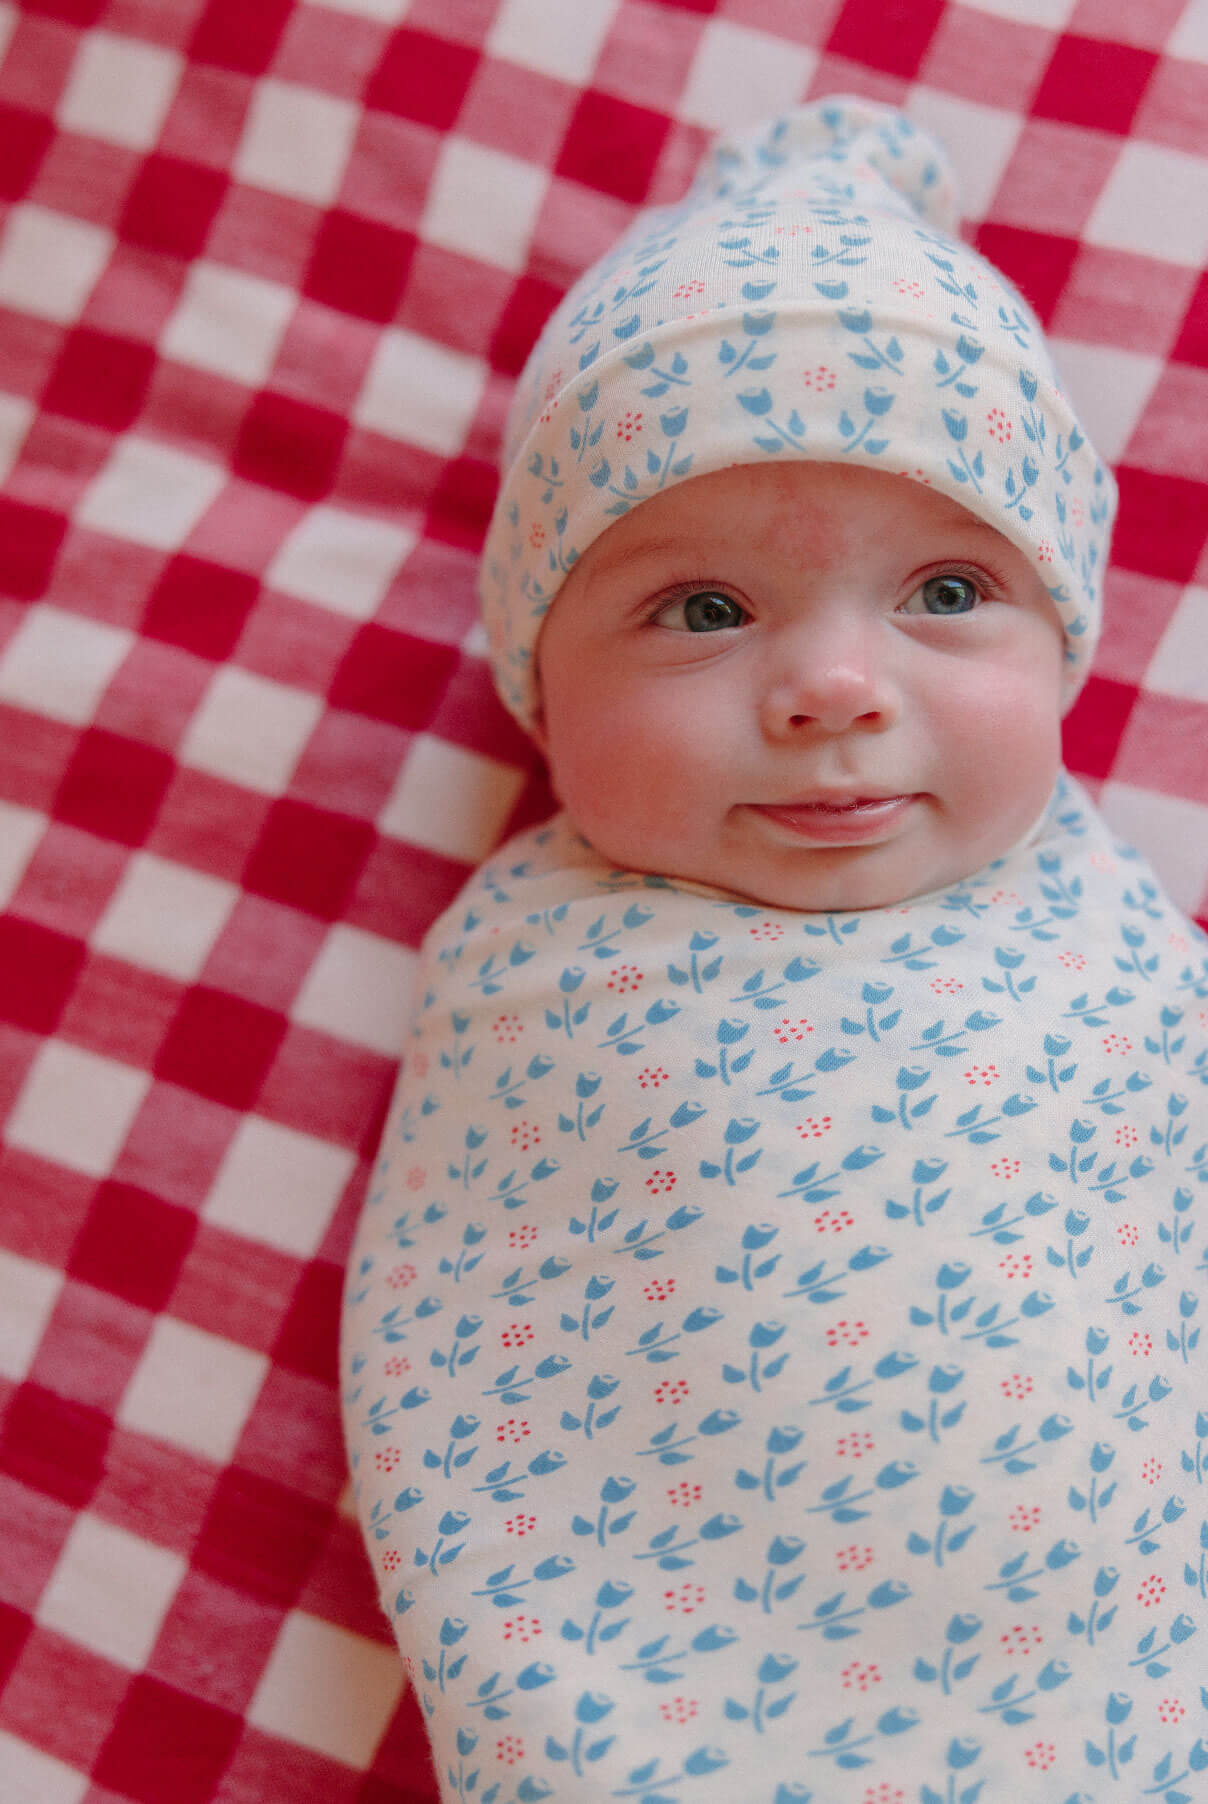 Baby smiles and looks off to side swaddled in "poppy" floral print on a gingham blanket